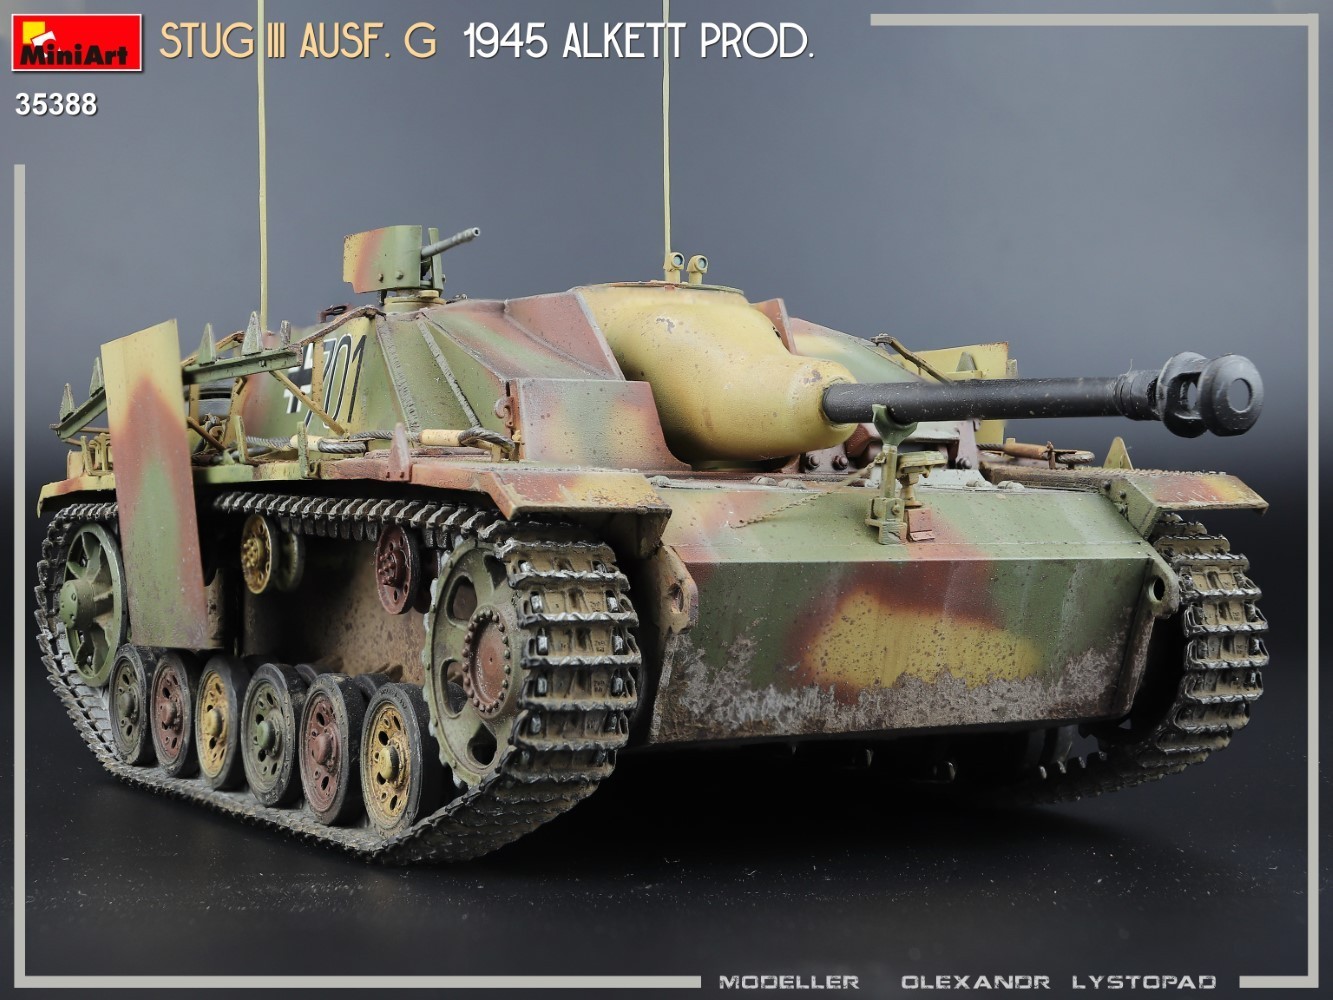 MiniArt to Release Highly Detailed 1/35 StuG III Ausf. G 1945 Alkett Prod. Model Kit Painting and Marking-11